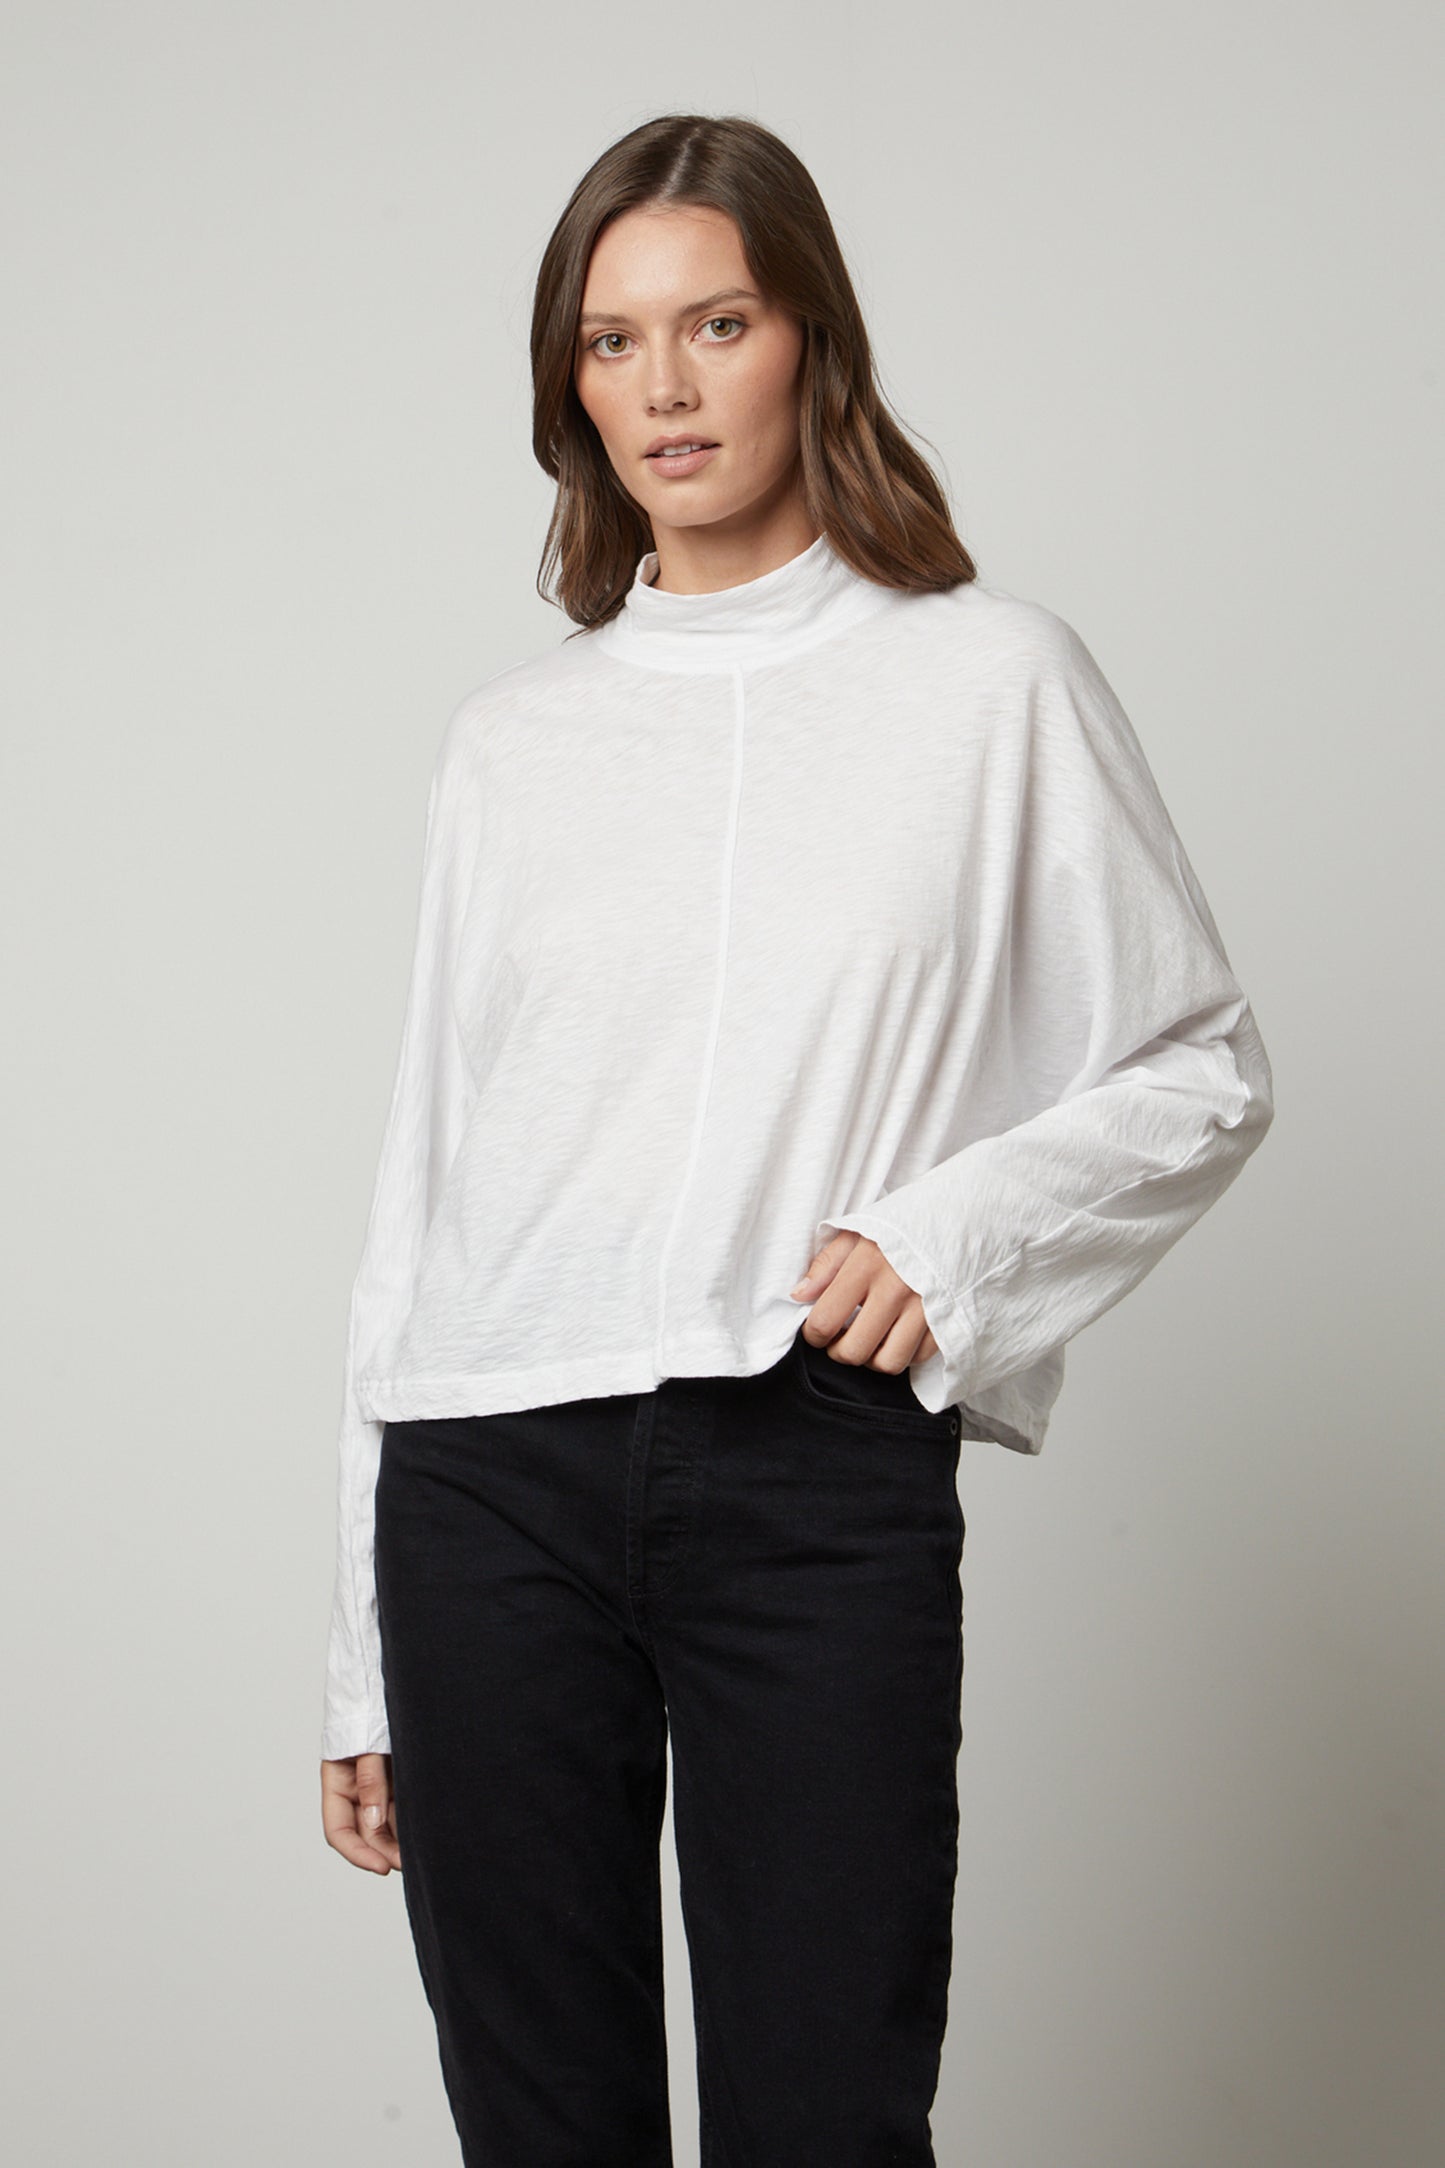 The model is wearing a white STACEY MOCK NECK TEE by Velvet by Graham & Spencer and black jeans.-26883549561025